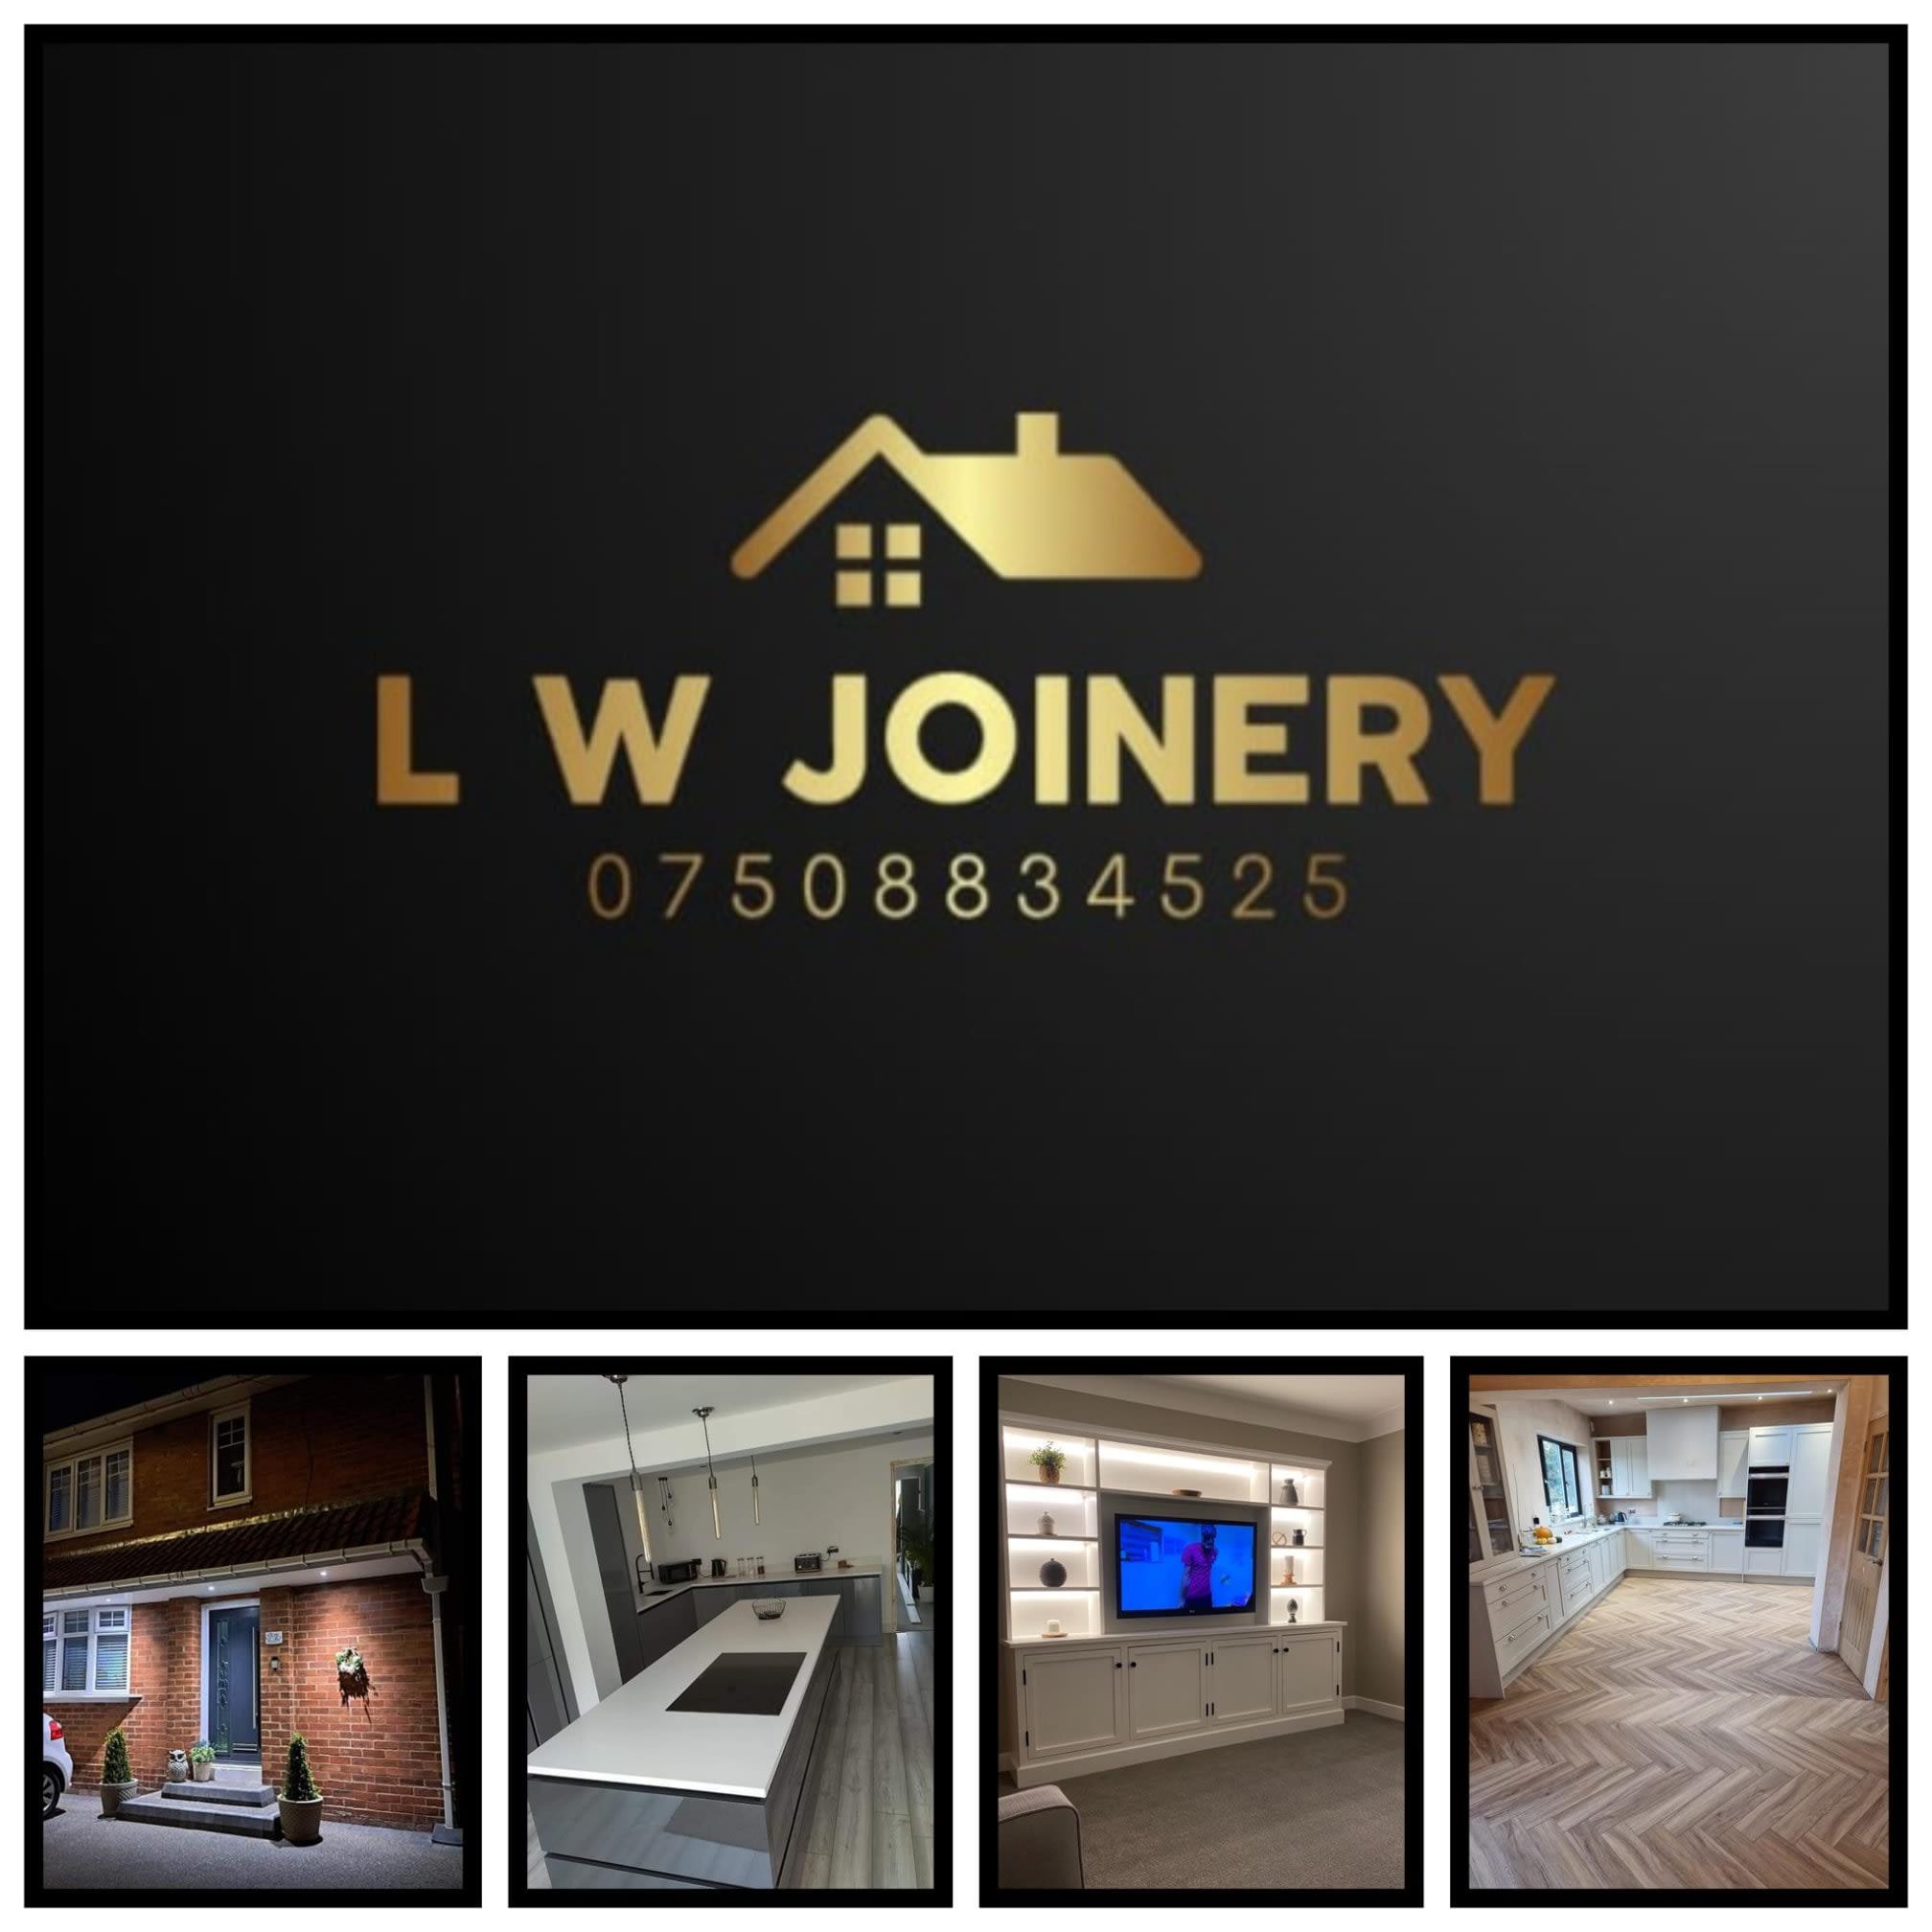 LW Joinery - Wallsend, Tyne and Wear NE28 9LQ - 07508 834525 | ShowMeLocal.com